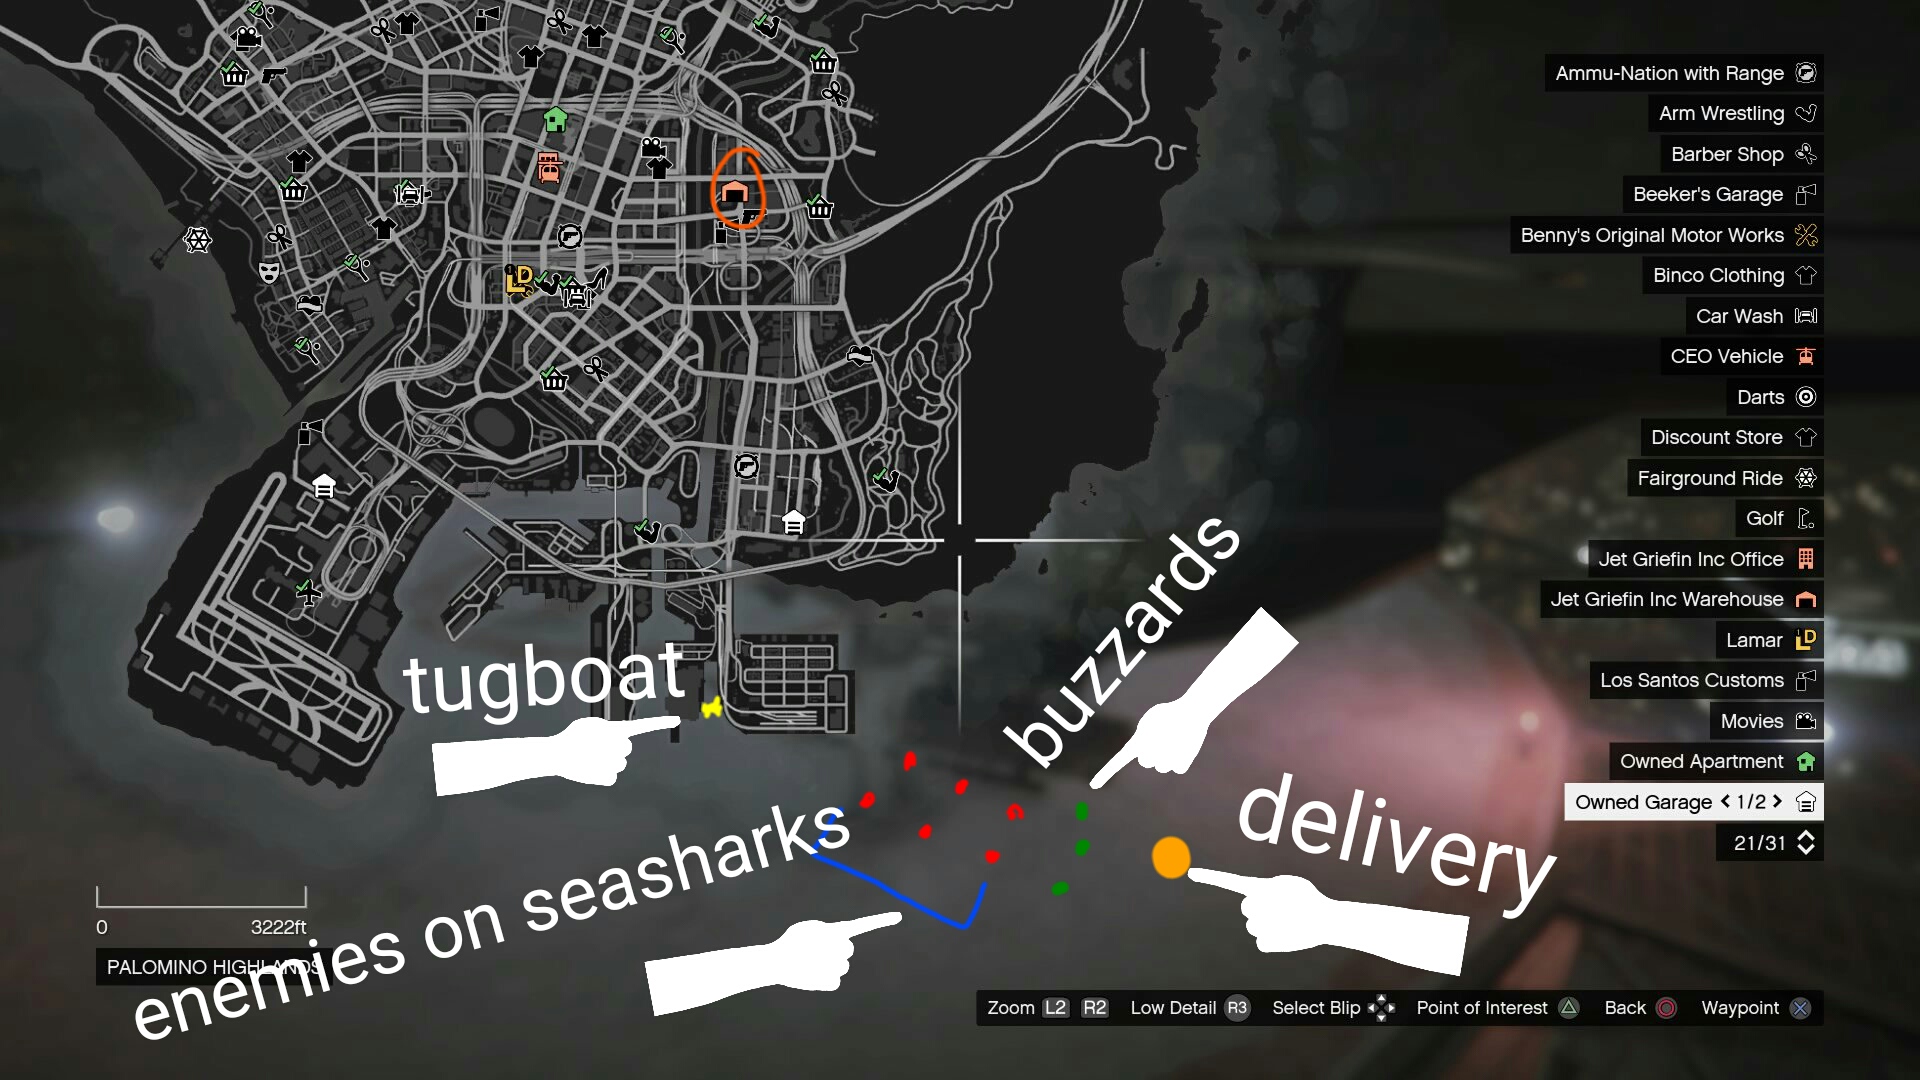 gta 5 online, does each warehouse have difference